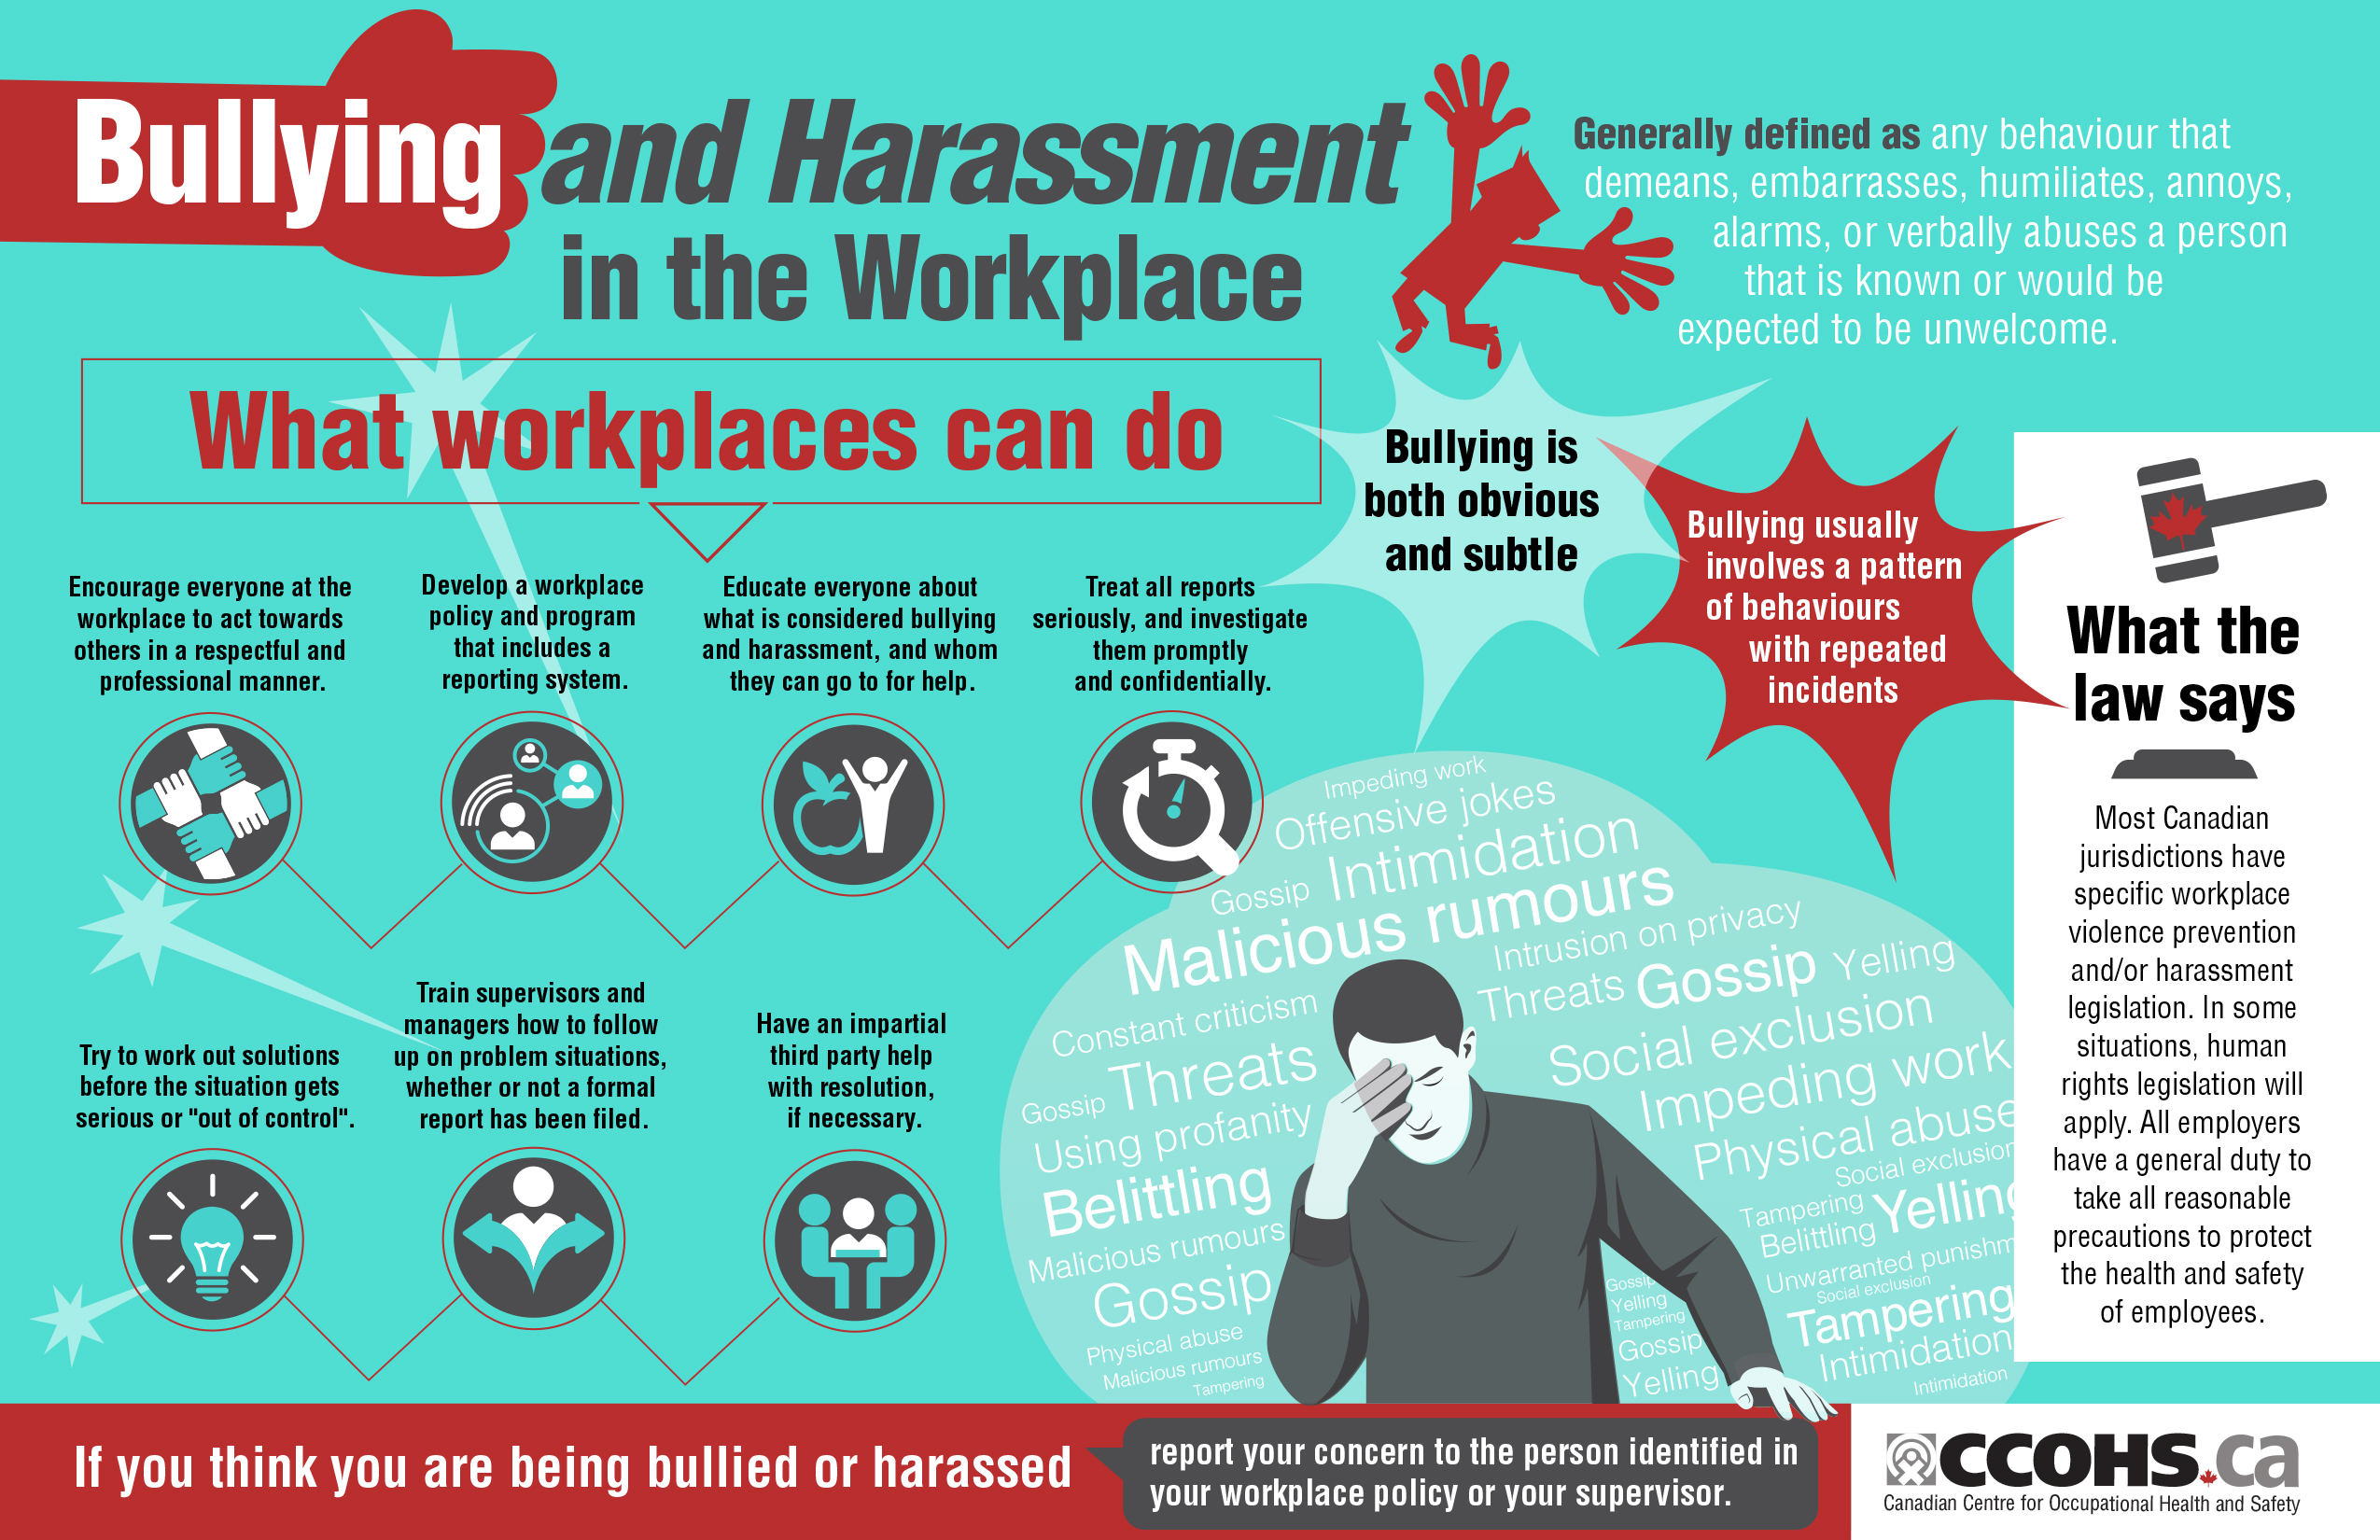 bullying and harassment in the workplace infographic